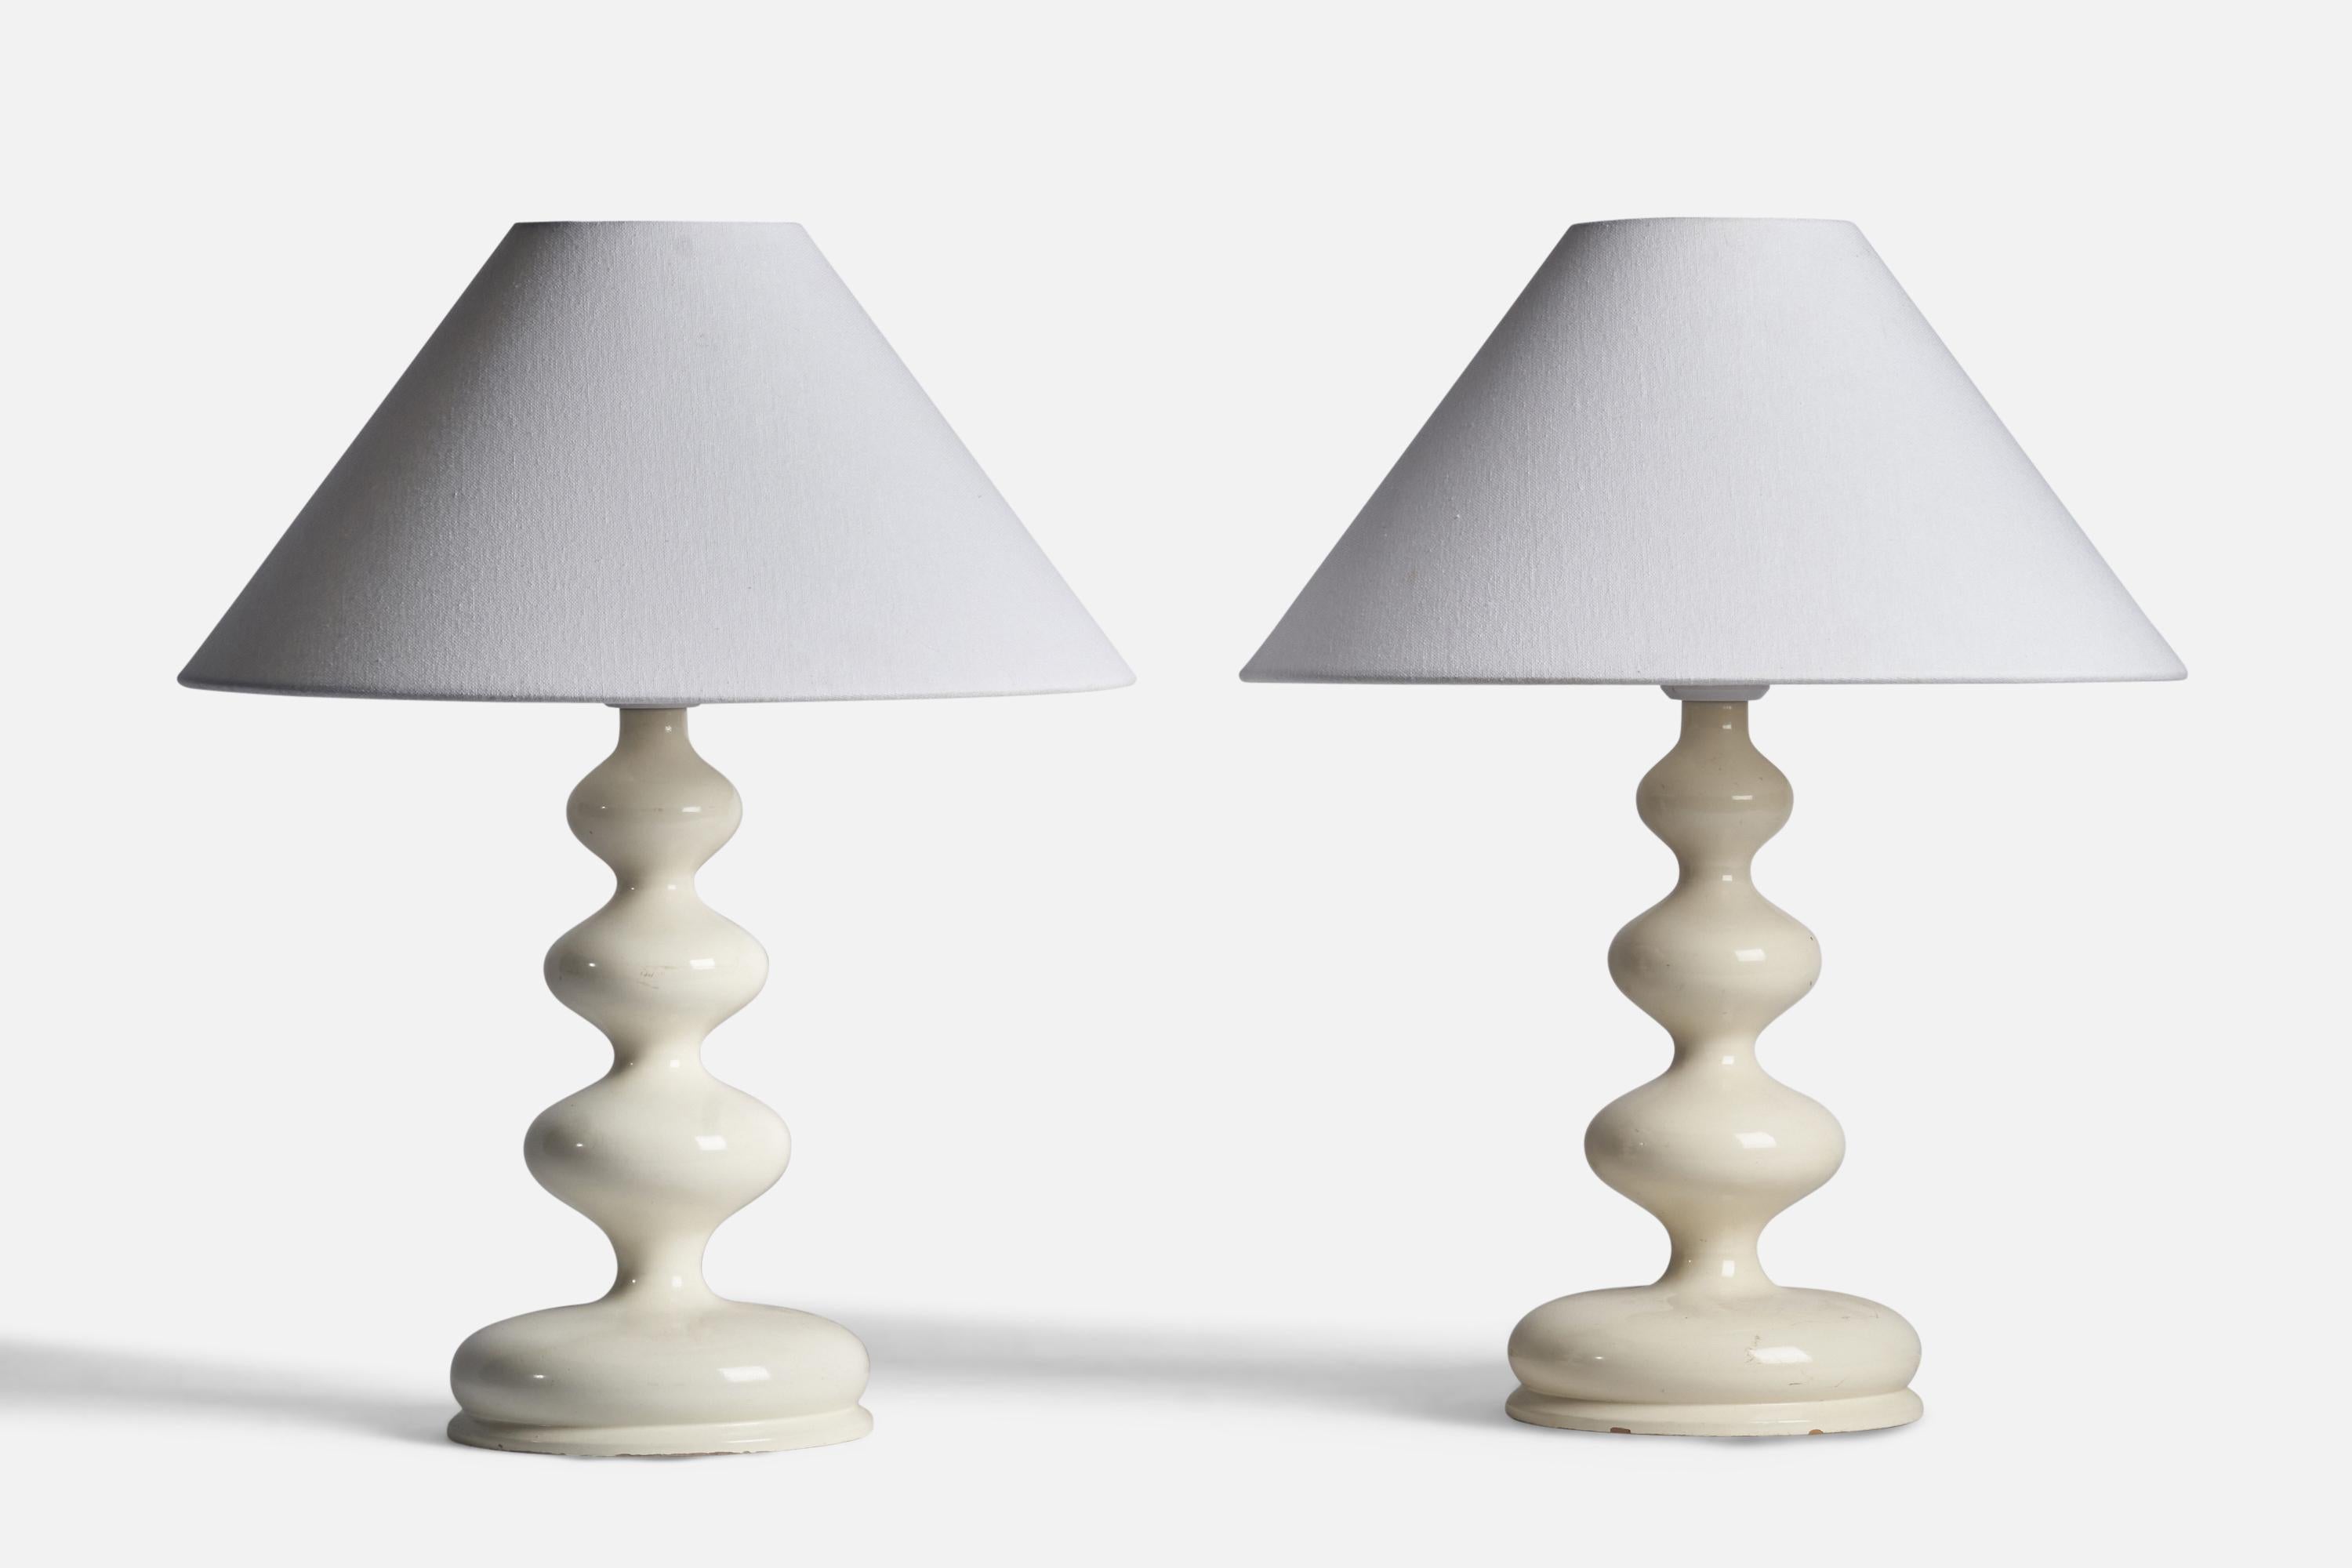 A pair of cream-white lacquered table lamps designed and produced in Sweden, 1960s.

Dimensions of Lamp (inches): 15” H x 7” Diameter
Dimensions of Shade (inches): 4.5” Top Diameter x 15.75” Bottom Diameter x 9.25” H
Dimensions of Lamp with Shade